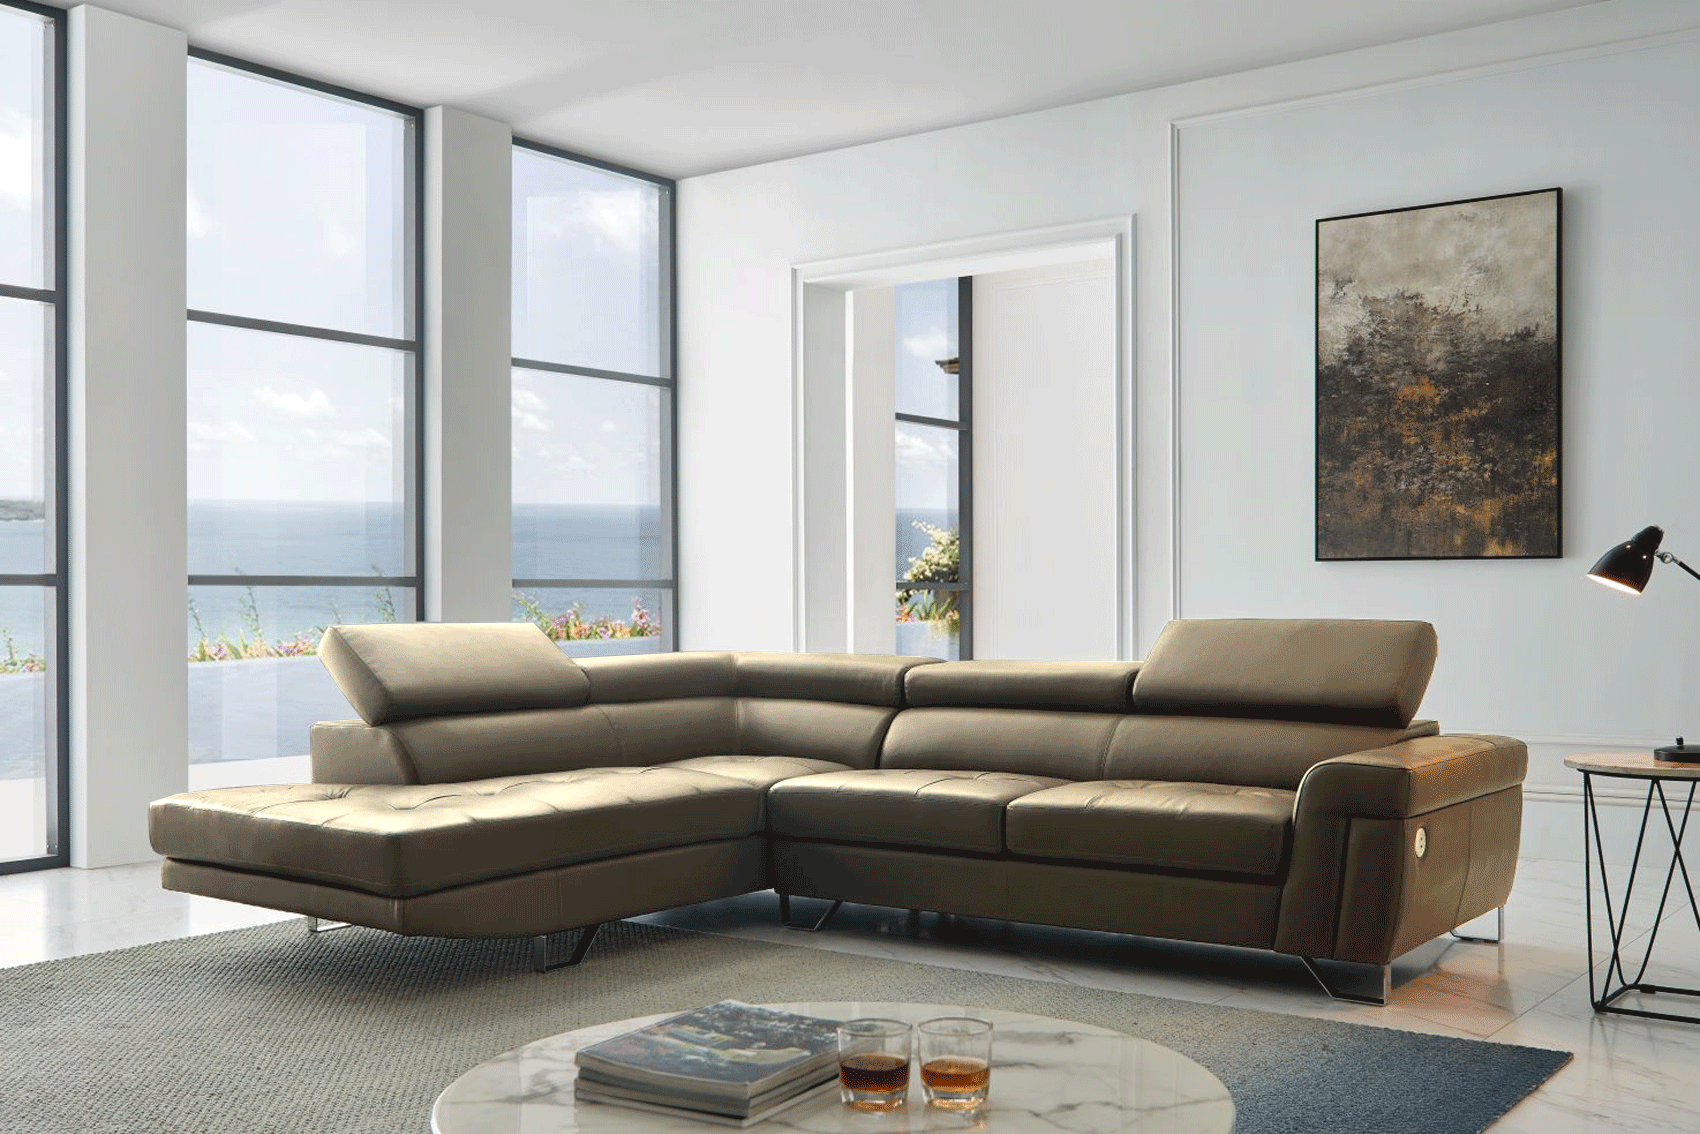 Living Room Furniture Reclining and Sliding Seats Sets 1807 Sectional Left Taupe